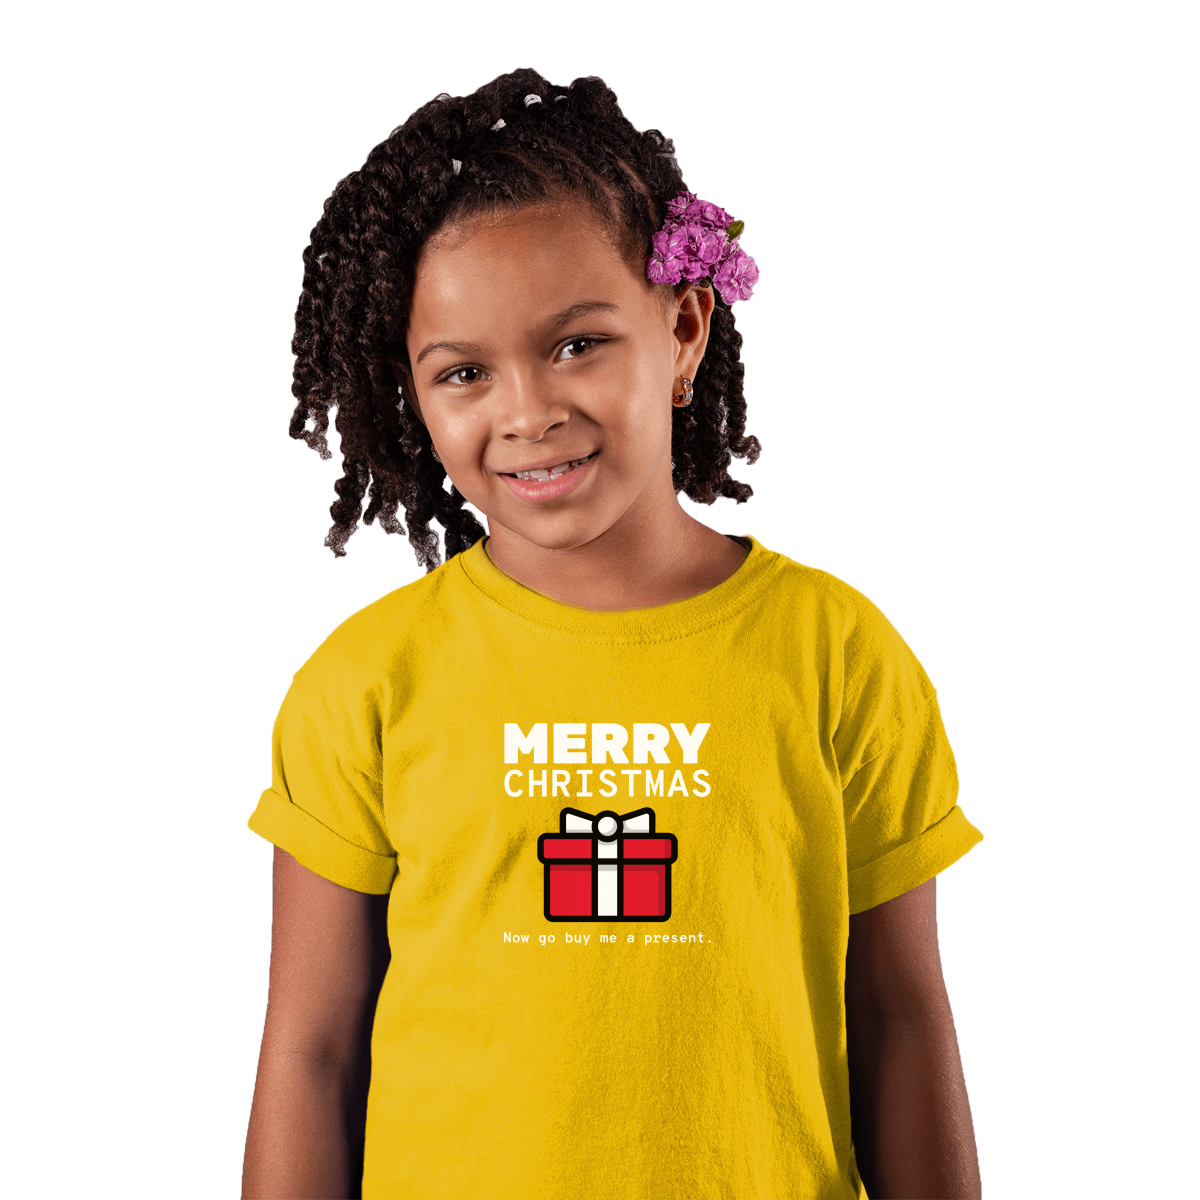 Merry Christmas Now Go Buy Me a Present Kids T-shirt | Yellow